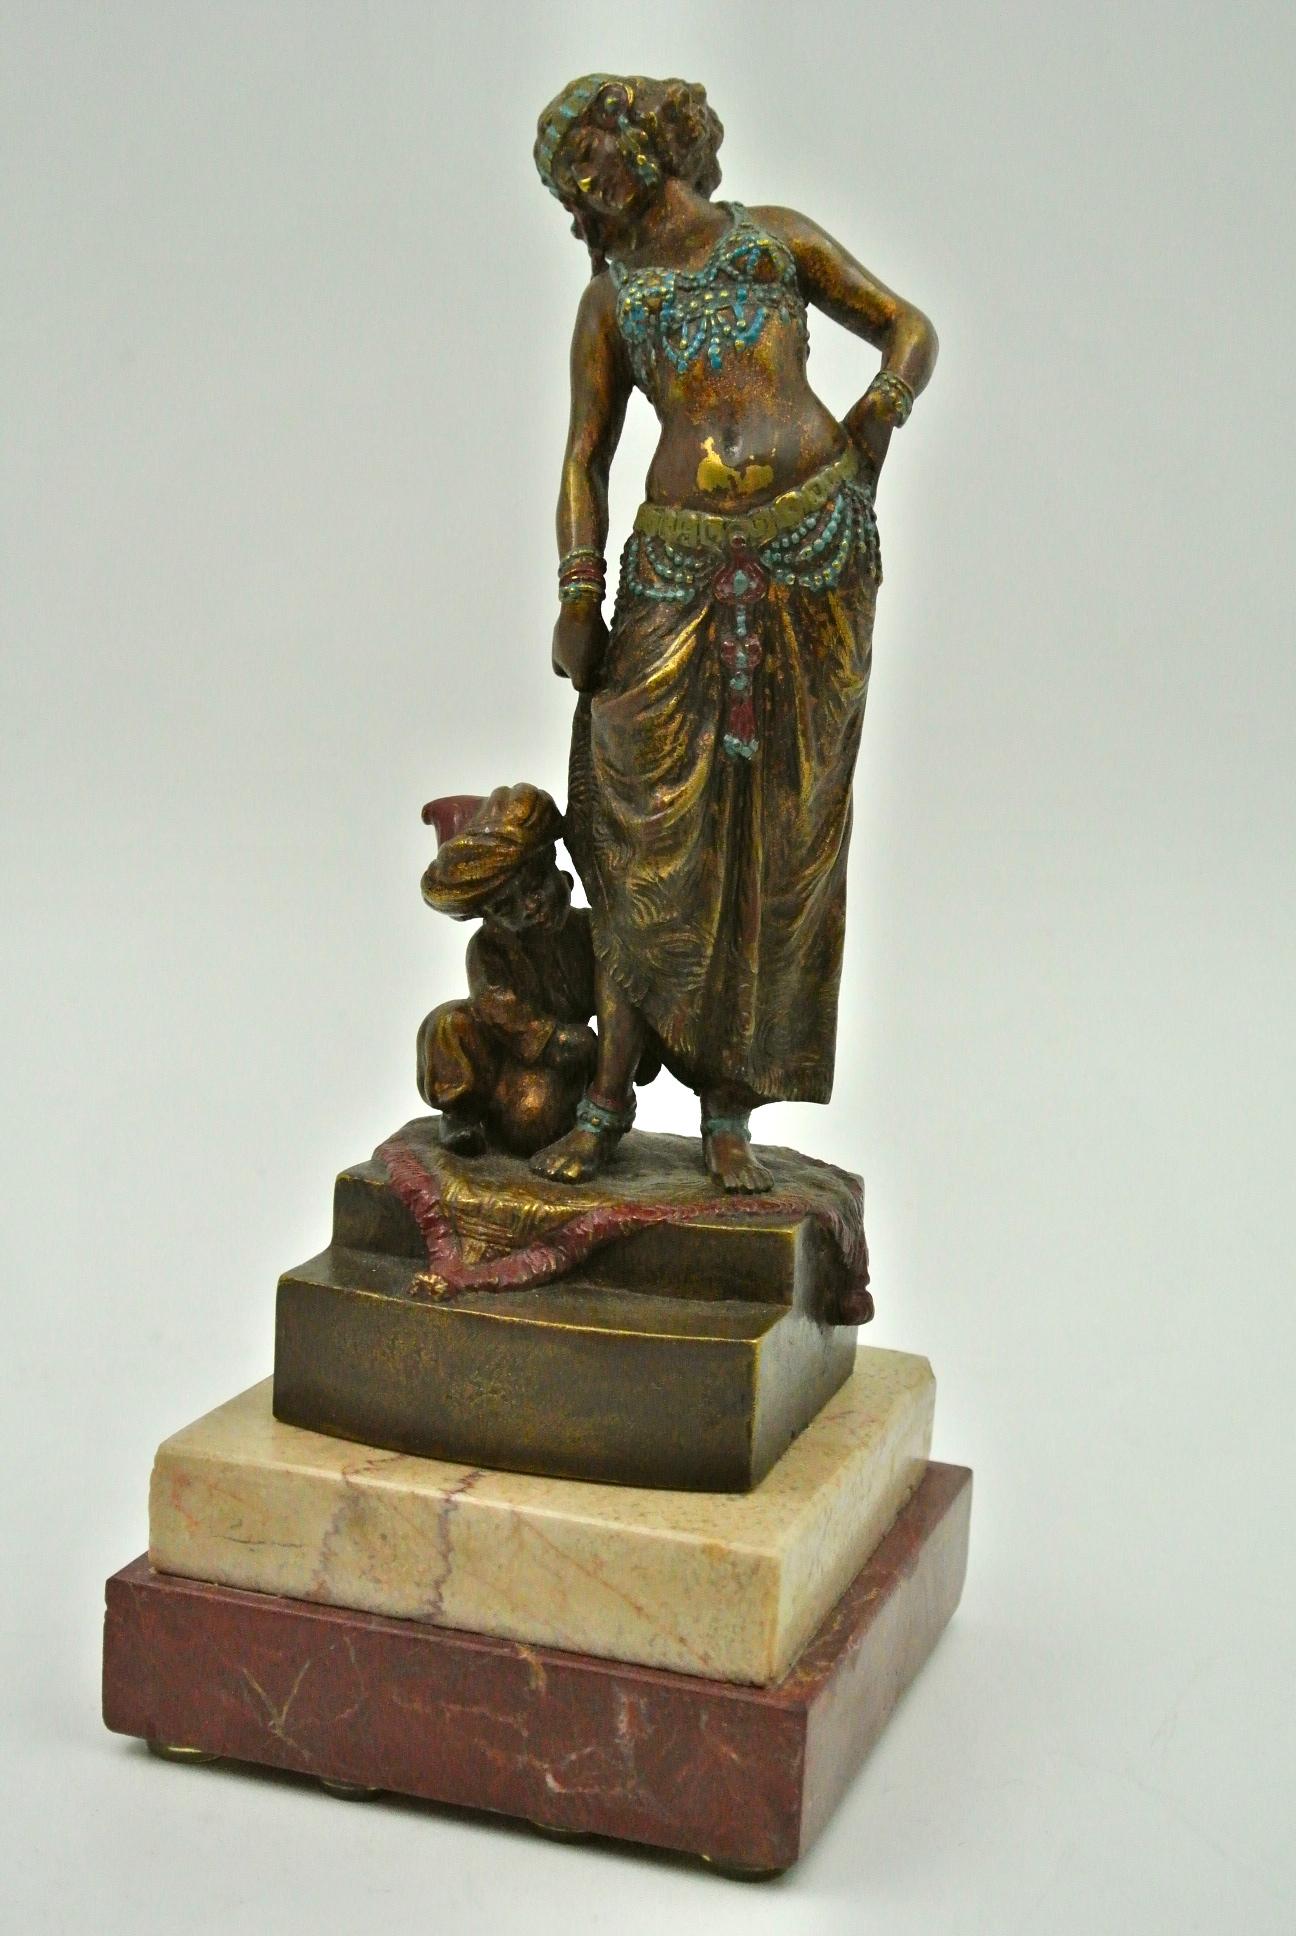 Bronze the Dancer and her Assistant, Vienna, signed B,
19th century.
Measures: H 27 cm, W 9.5 cm, D 10 cm.